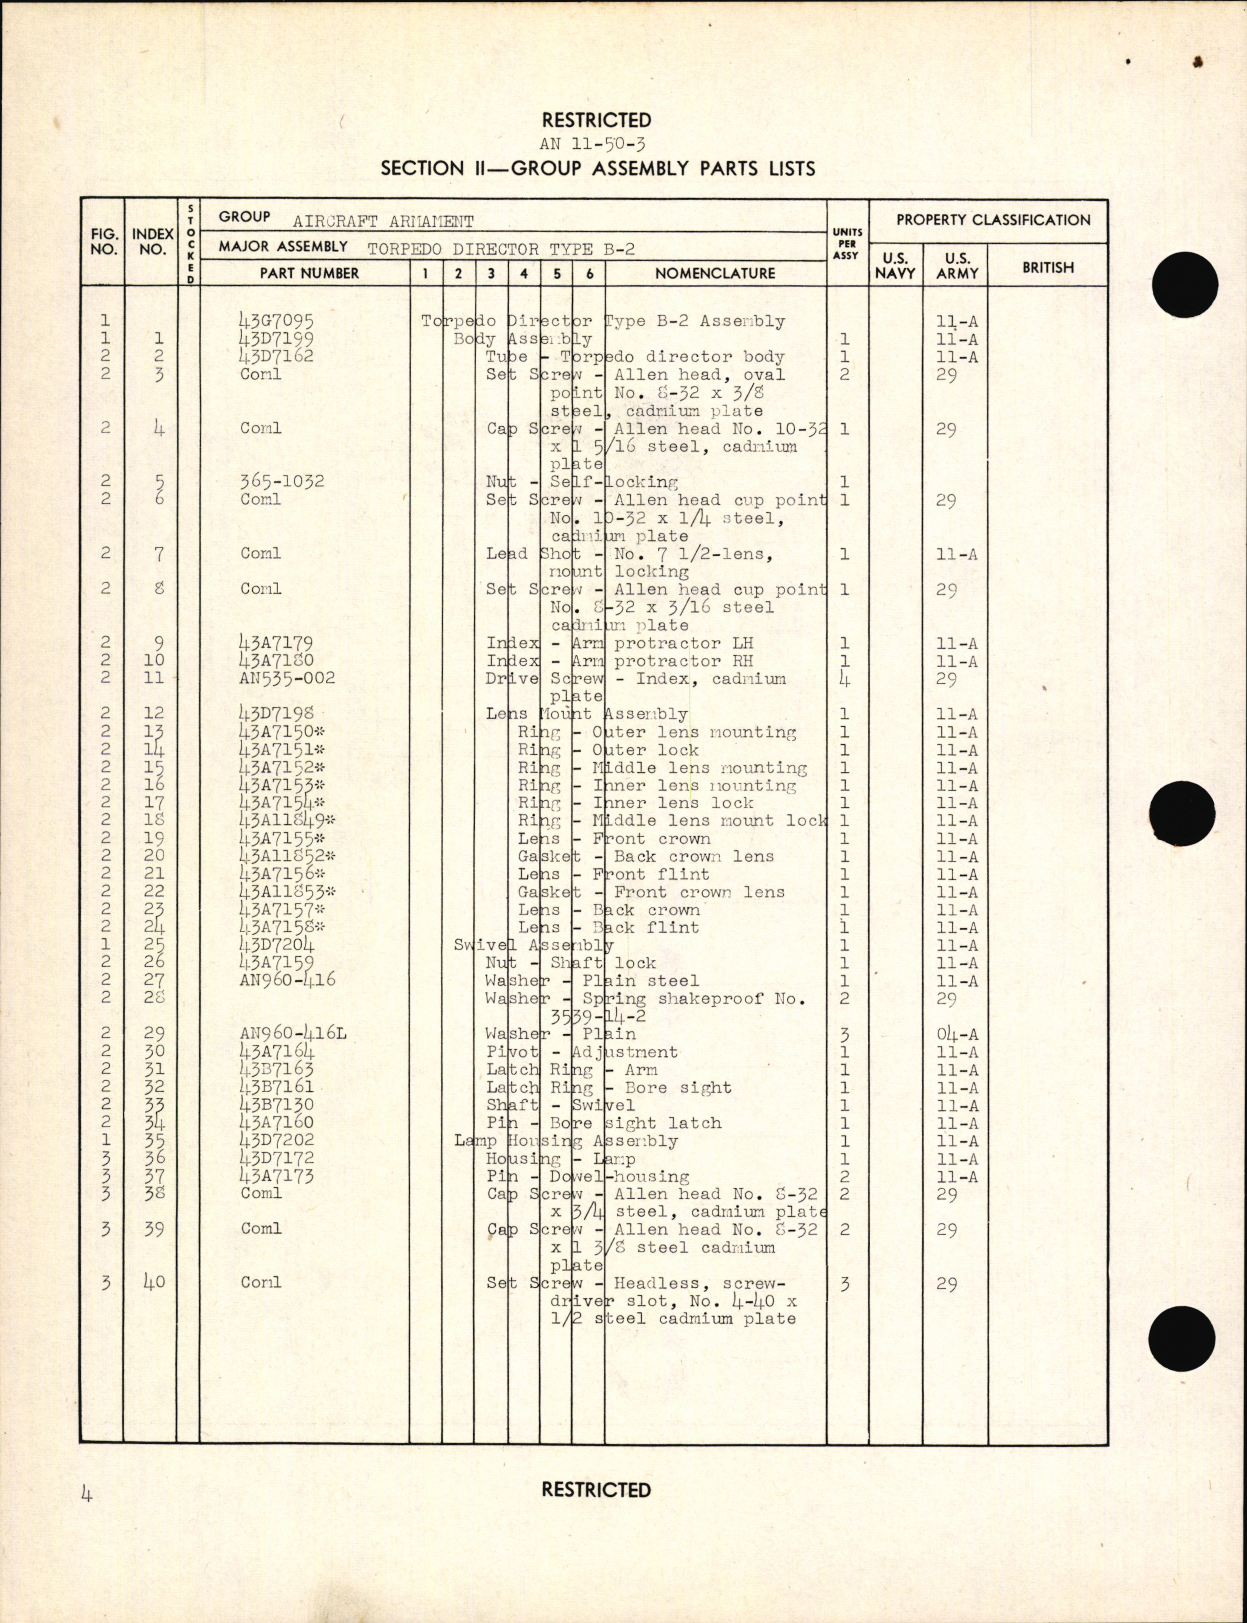 Sample page 6 from AirCorps Library document: Parts Catalog for Torpedo Director Army Model Type B-2